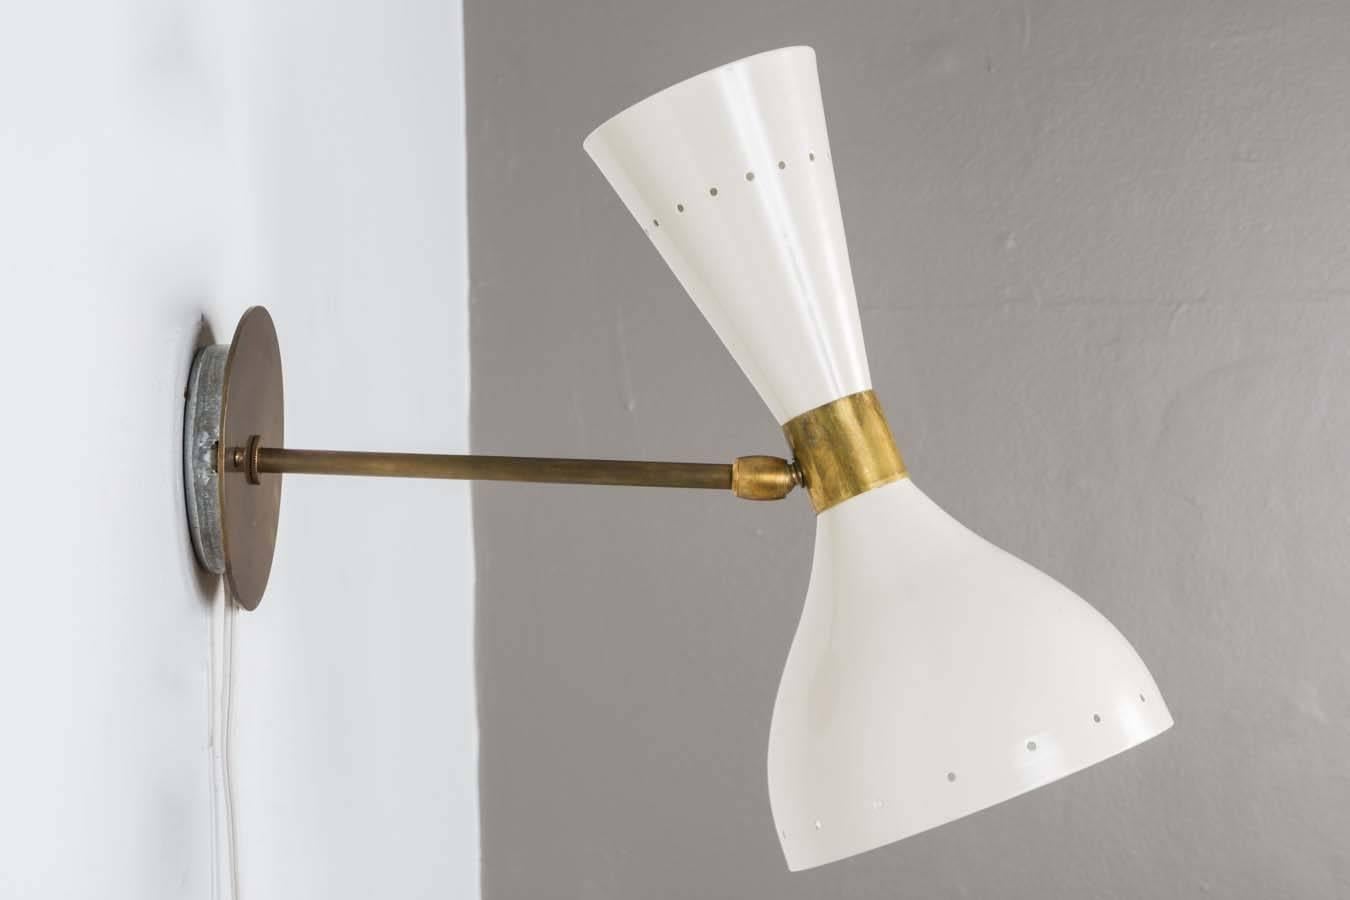 Double-cone Italian sconces in the style of Stilnovo. Adjustable ball joint where armature connects with cone. Large section of cone accommodates 75 watt standard bulb, upper smaller cone 60 watt candelabra. Executed in white enameled metal and